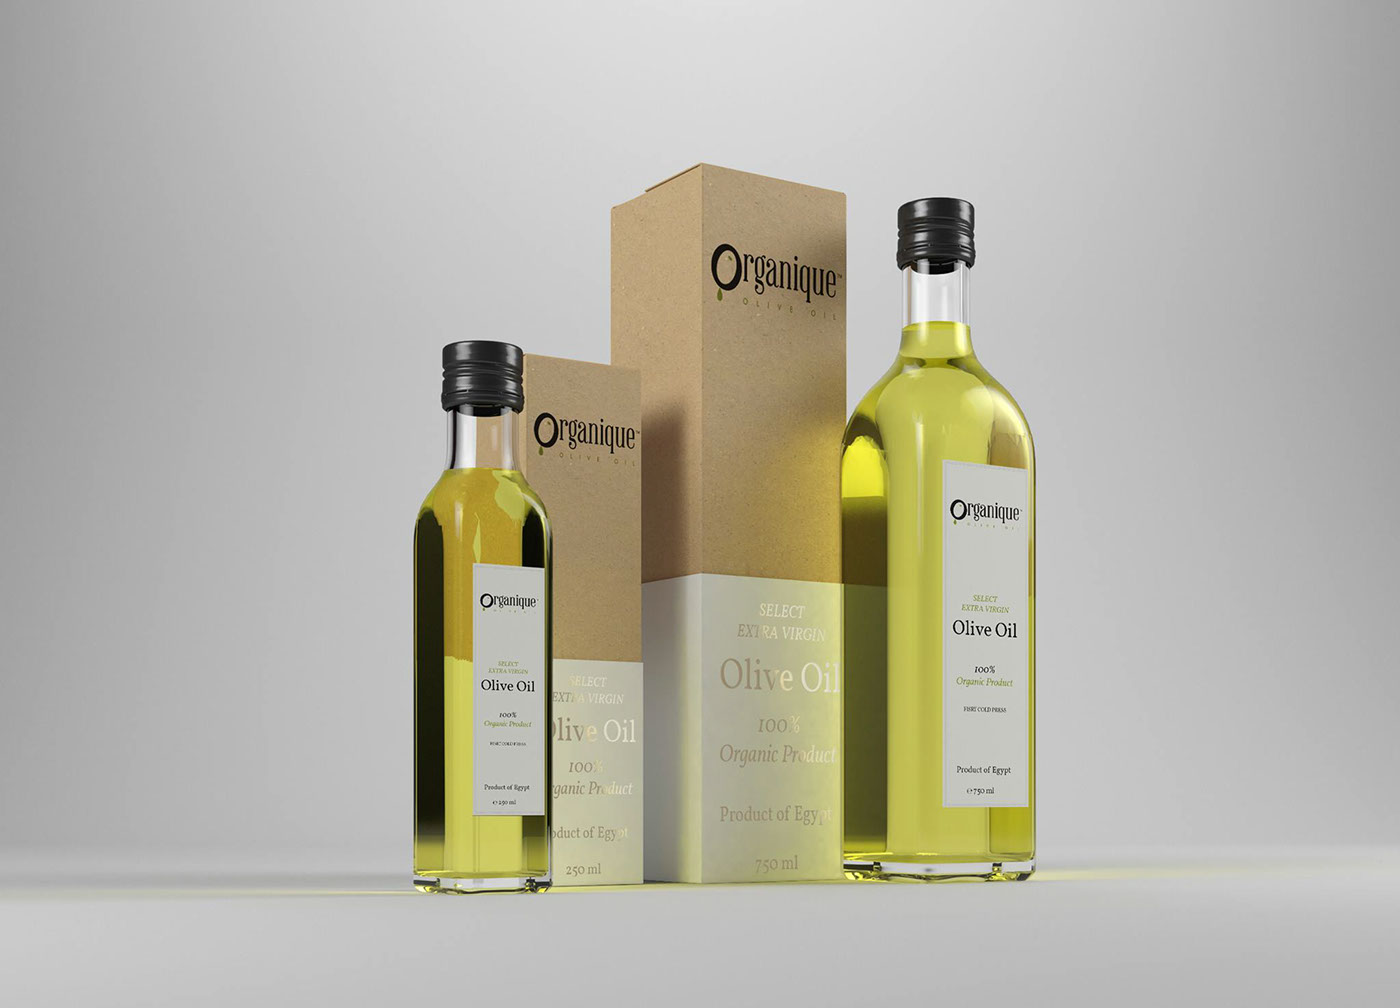 organic organique Olive Oil olive oil natural extra virgin egypt healthy Food 